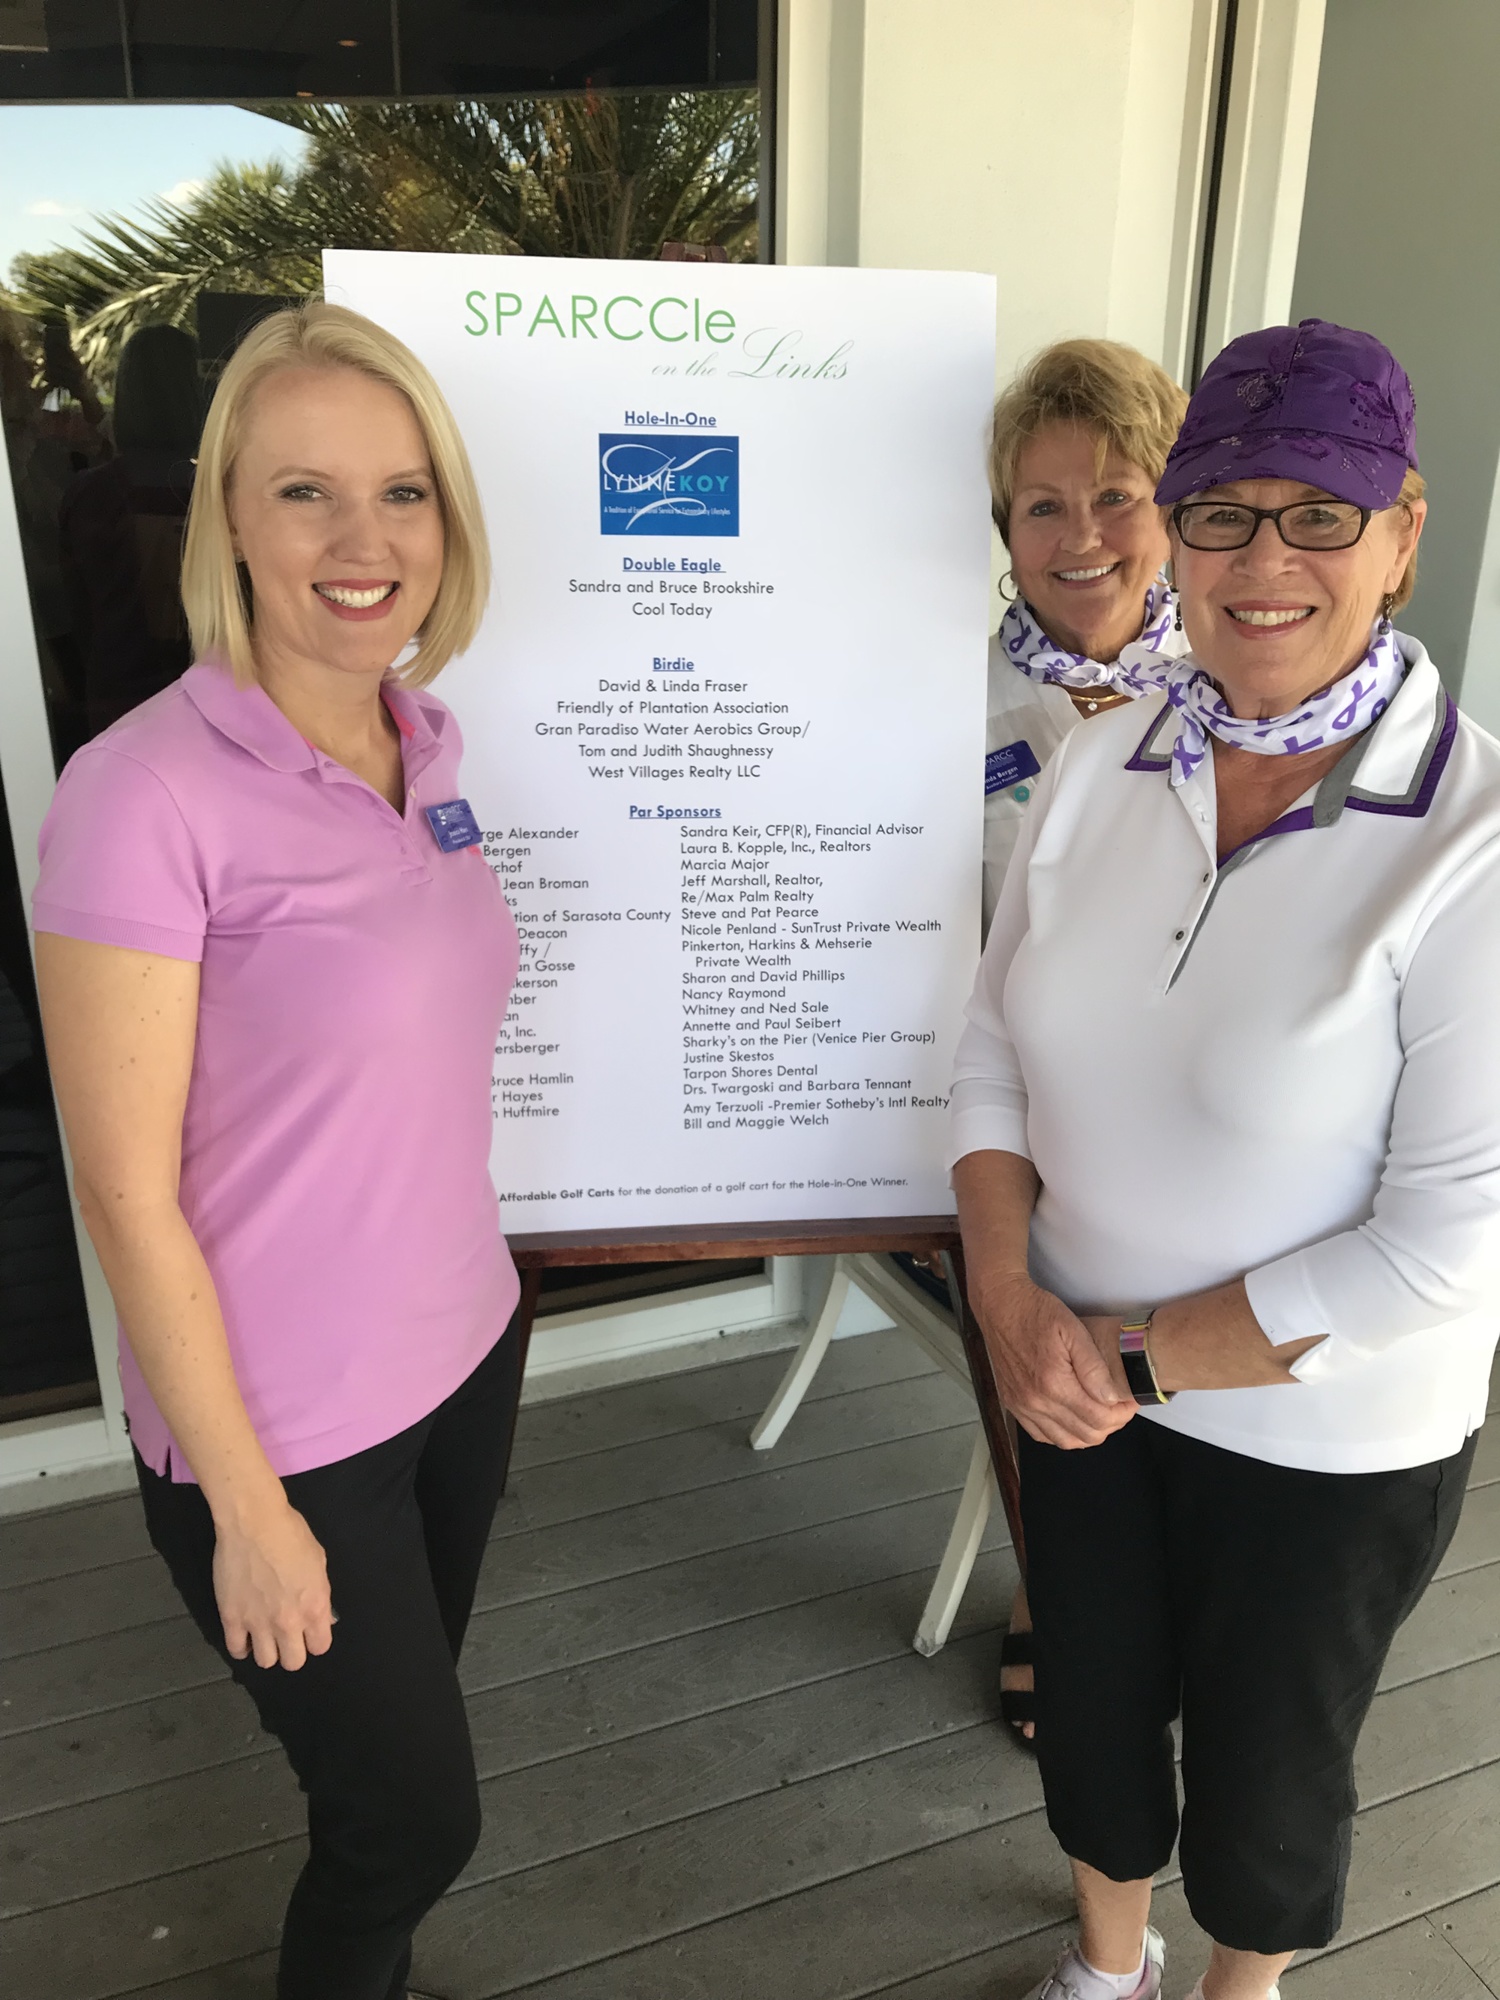 SPARCC CEO & President Jessica Hays, SPARCC Auxiliary President Linda Bergen and Co-Chairwoman Sandy Fulkerson